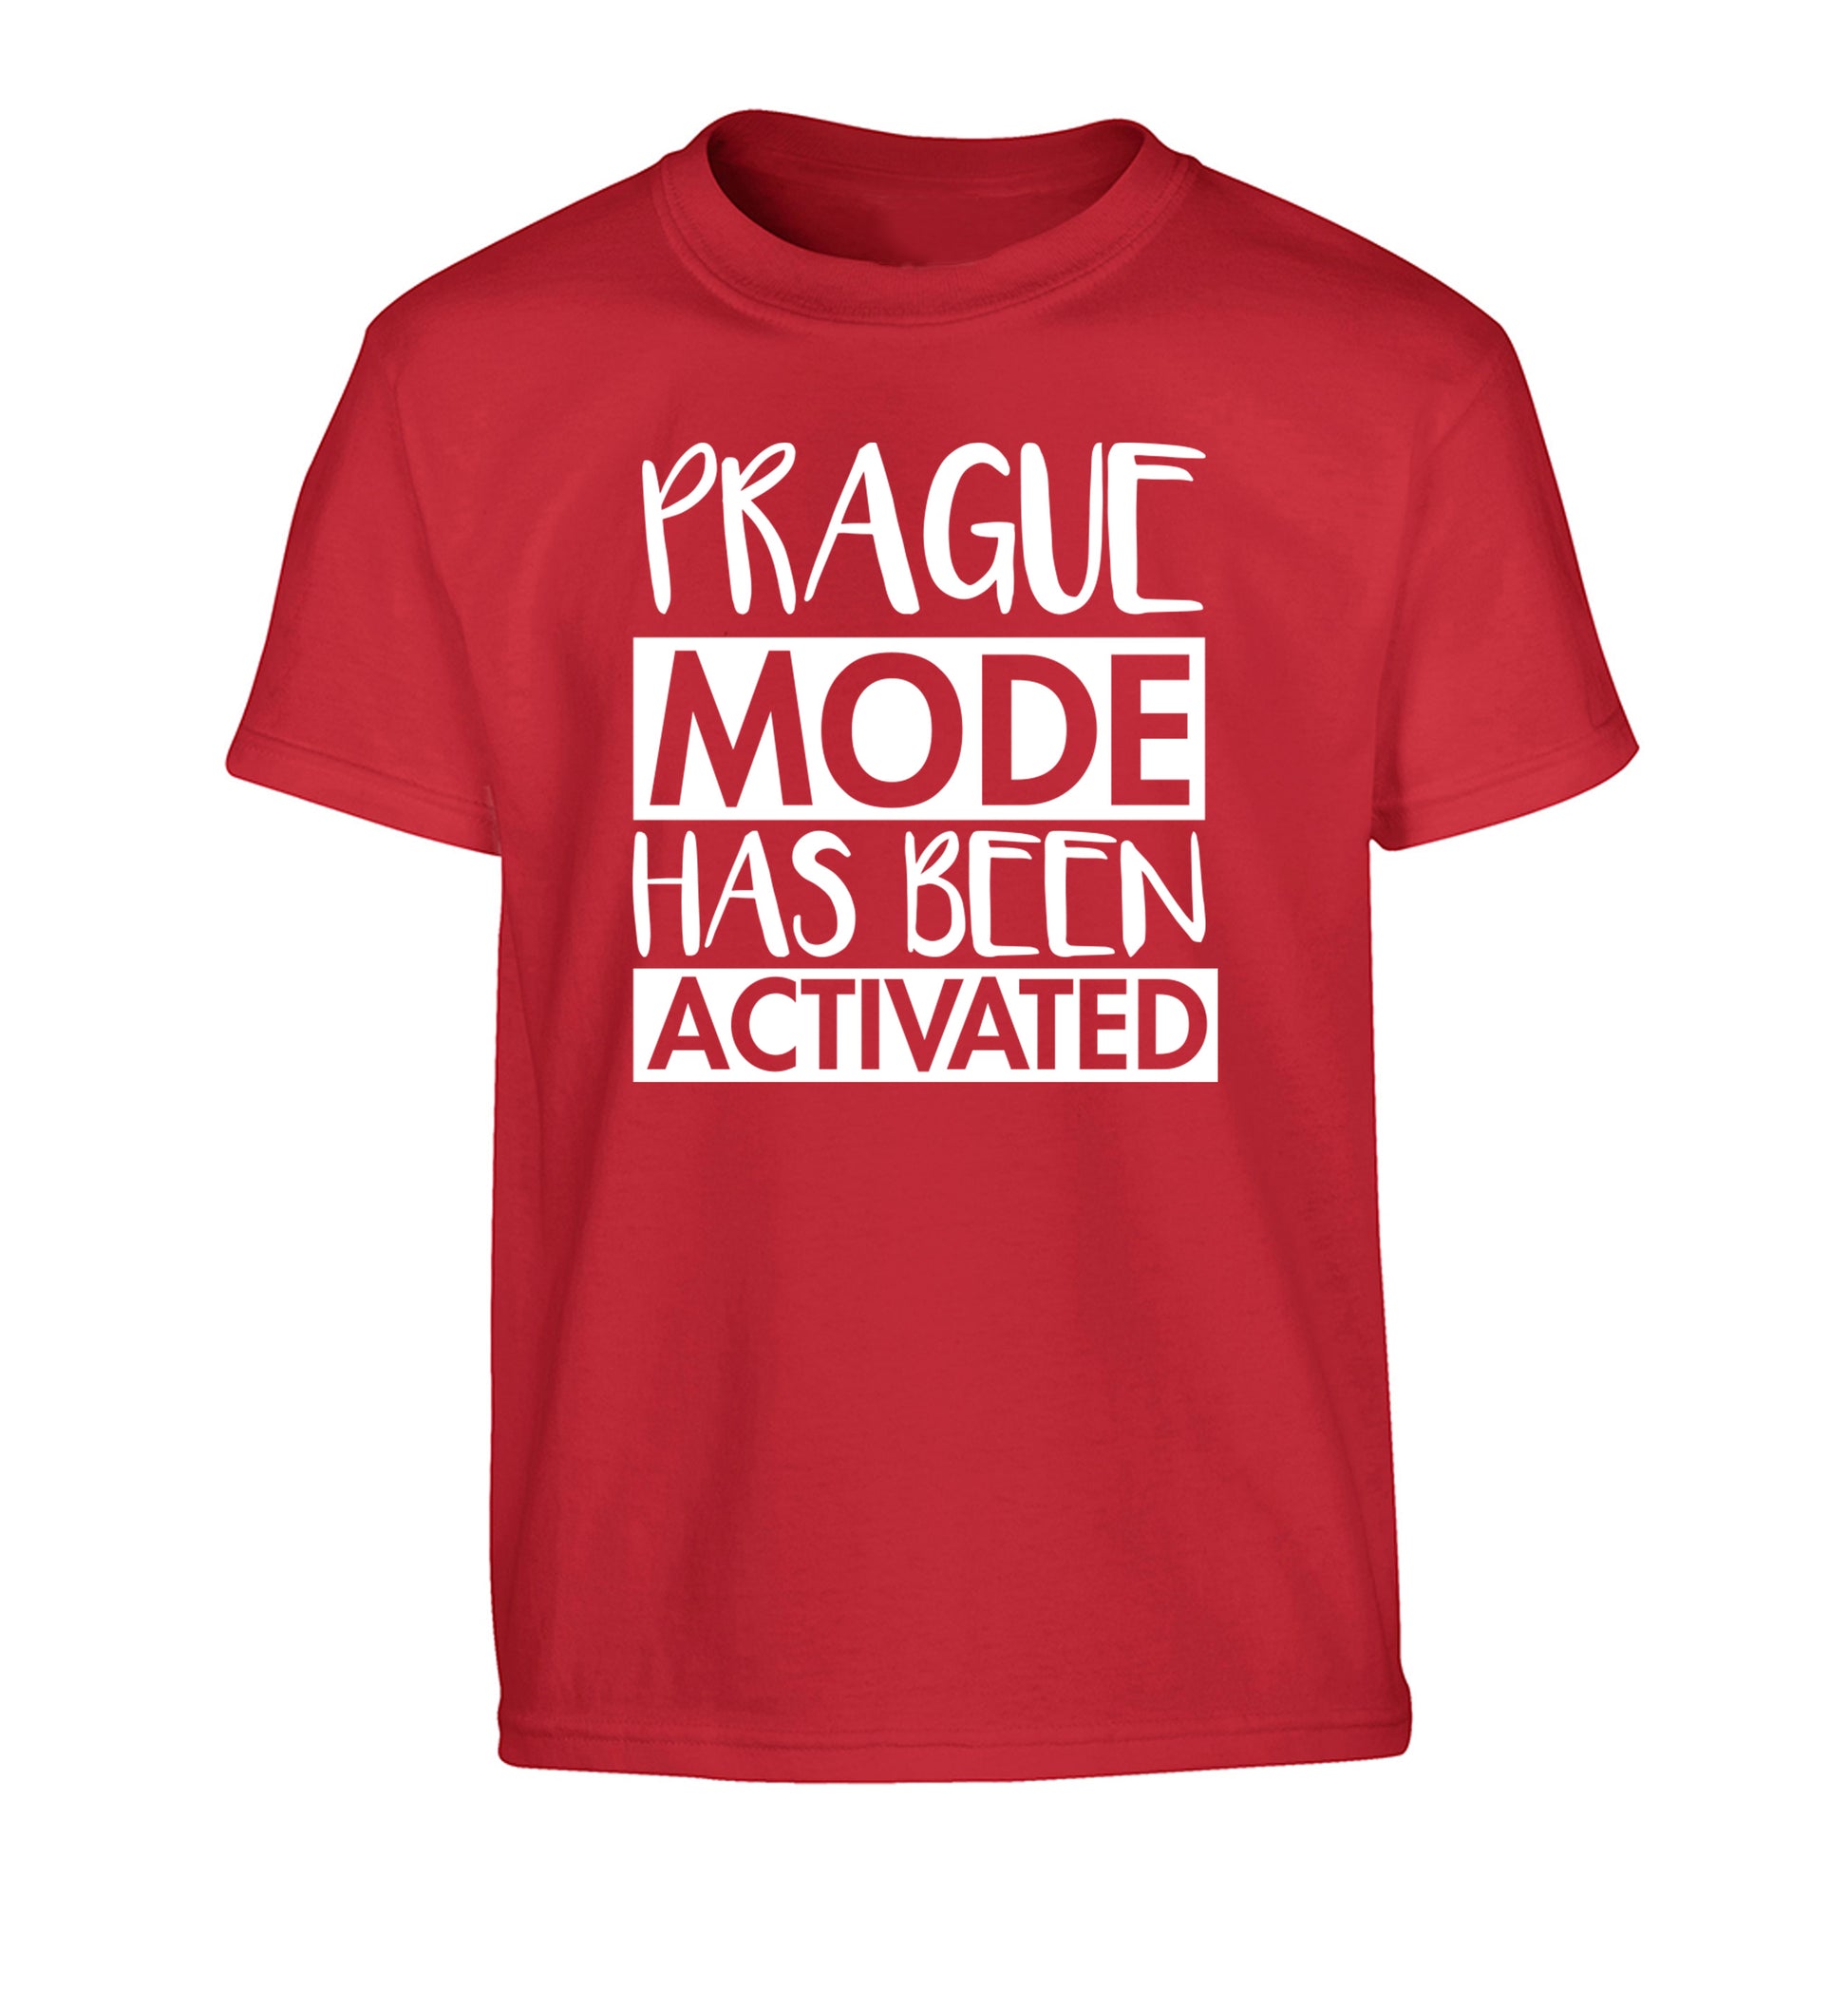 Prague mode has been activated Children's red Tshirt 12-13 Years